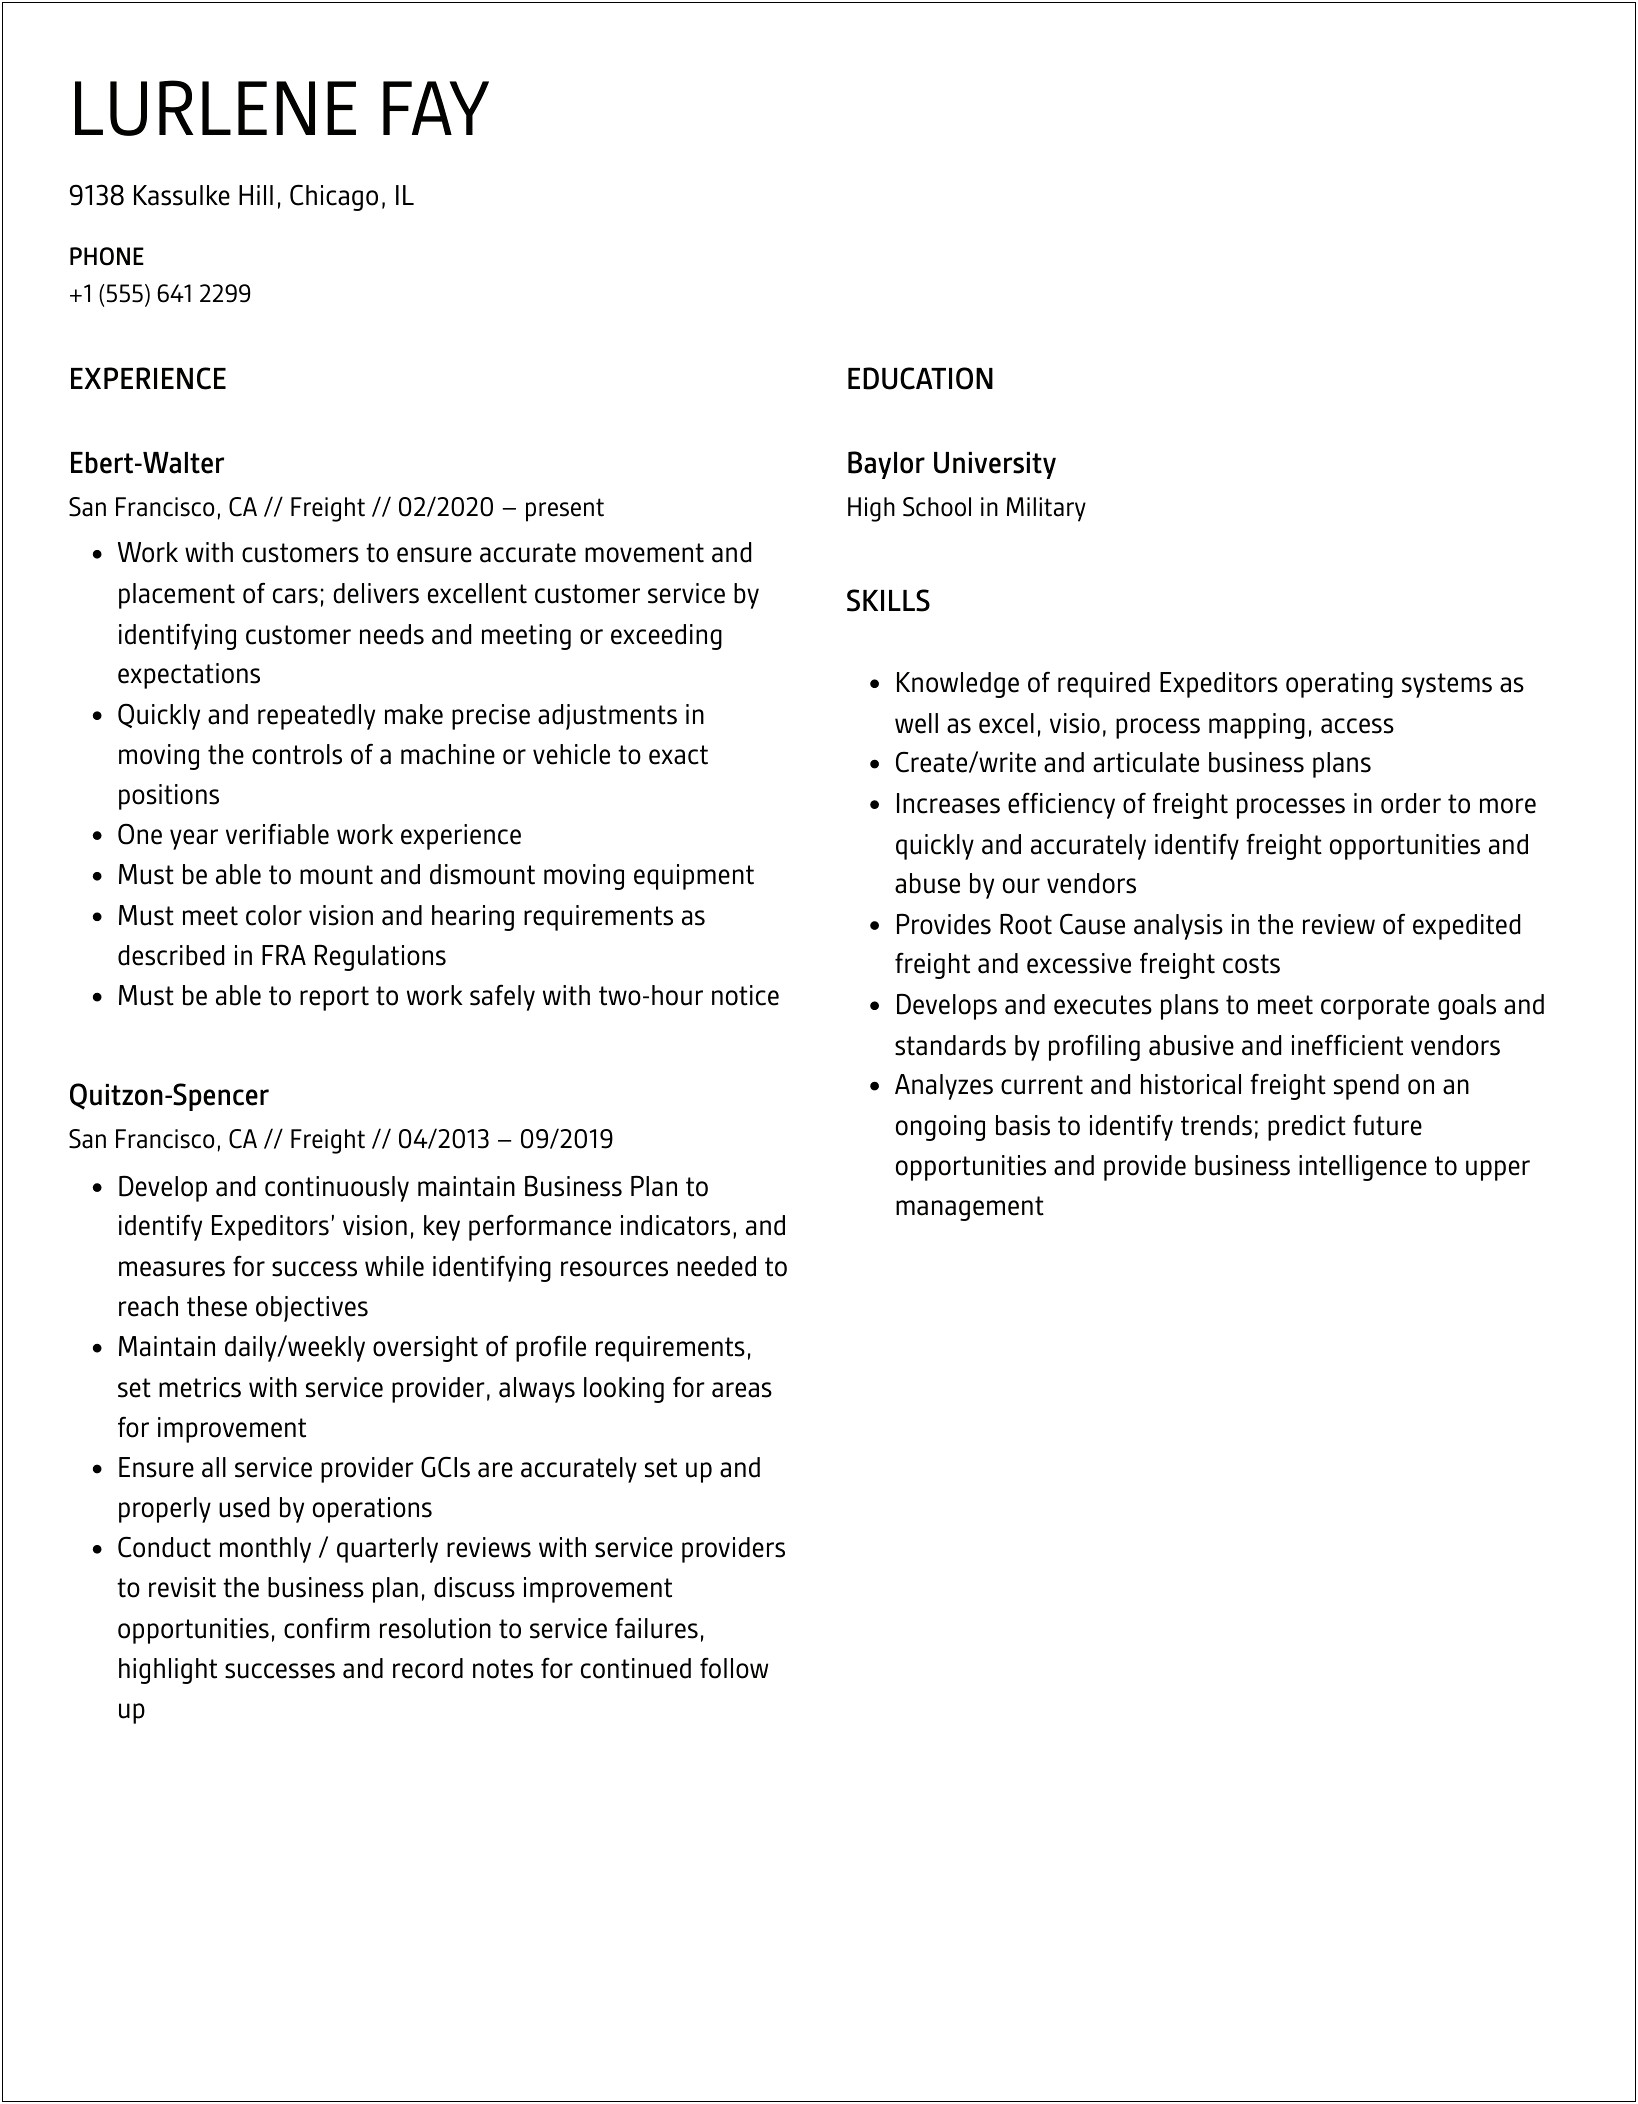 Freight Audit And Pay Resume Examples